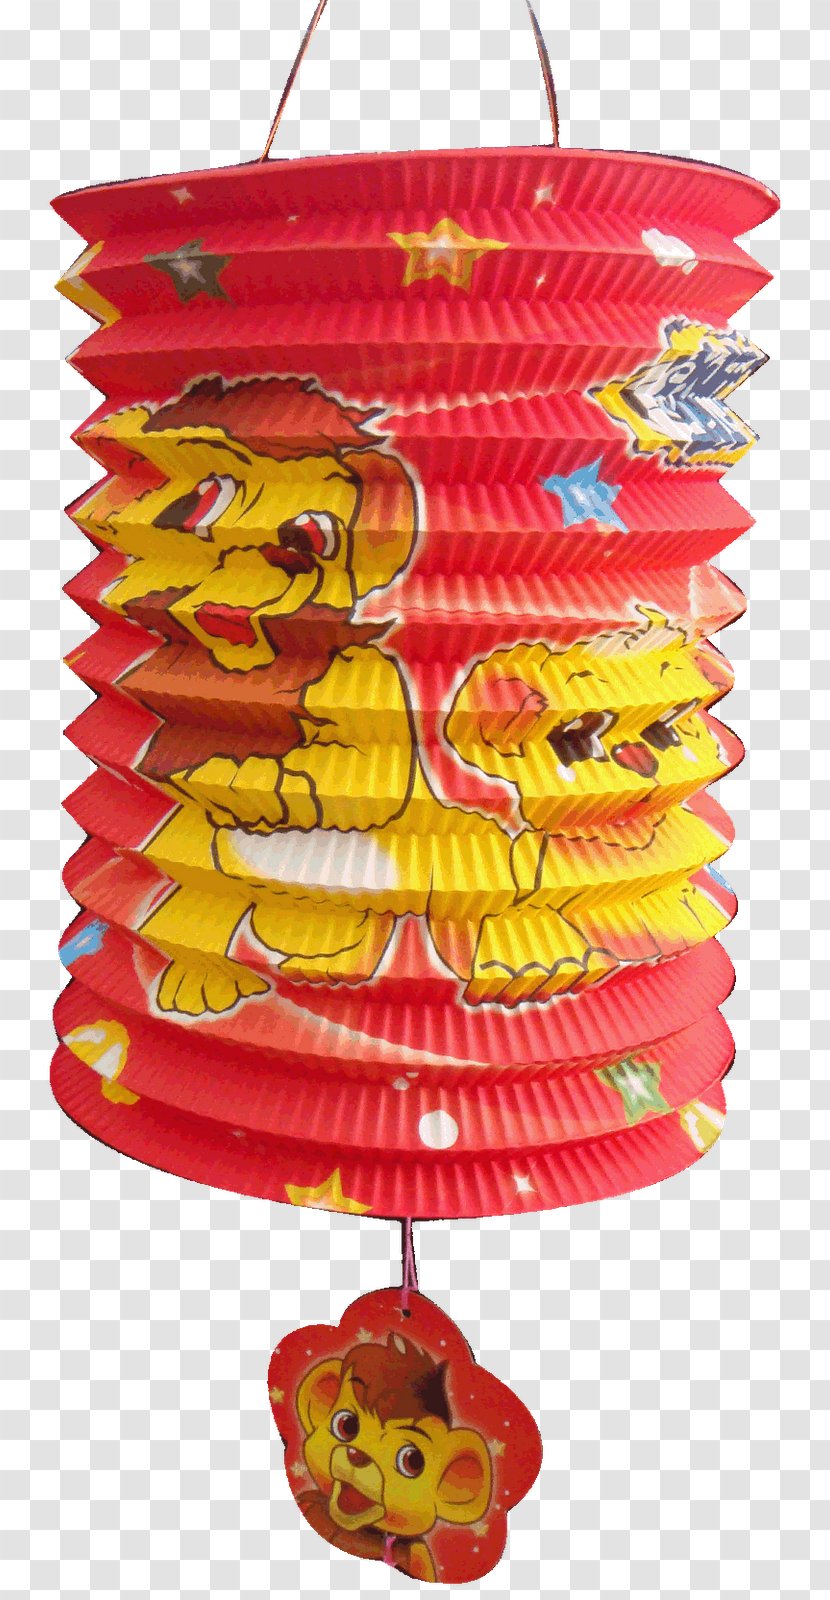 Toy - Yellow Transparent PNG